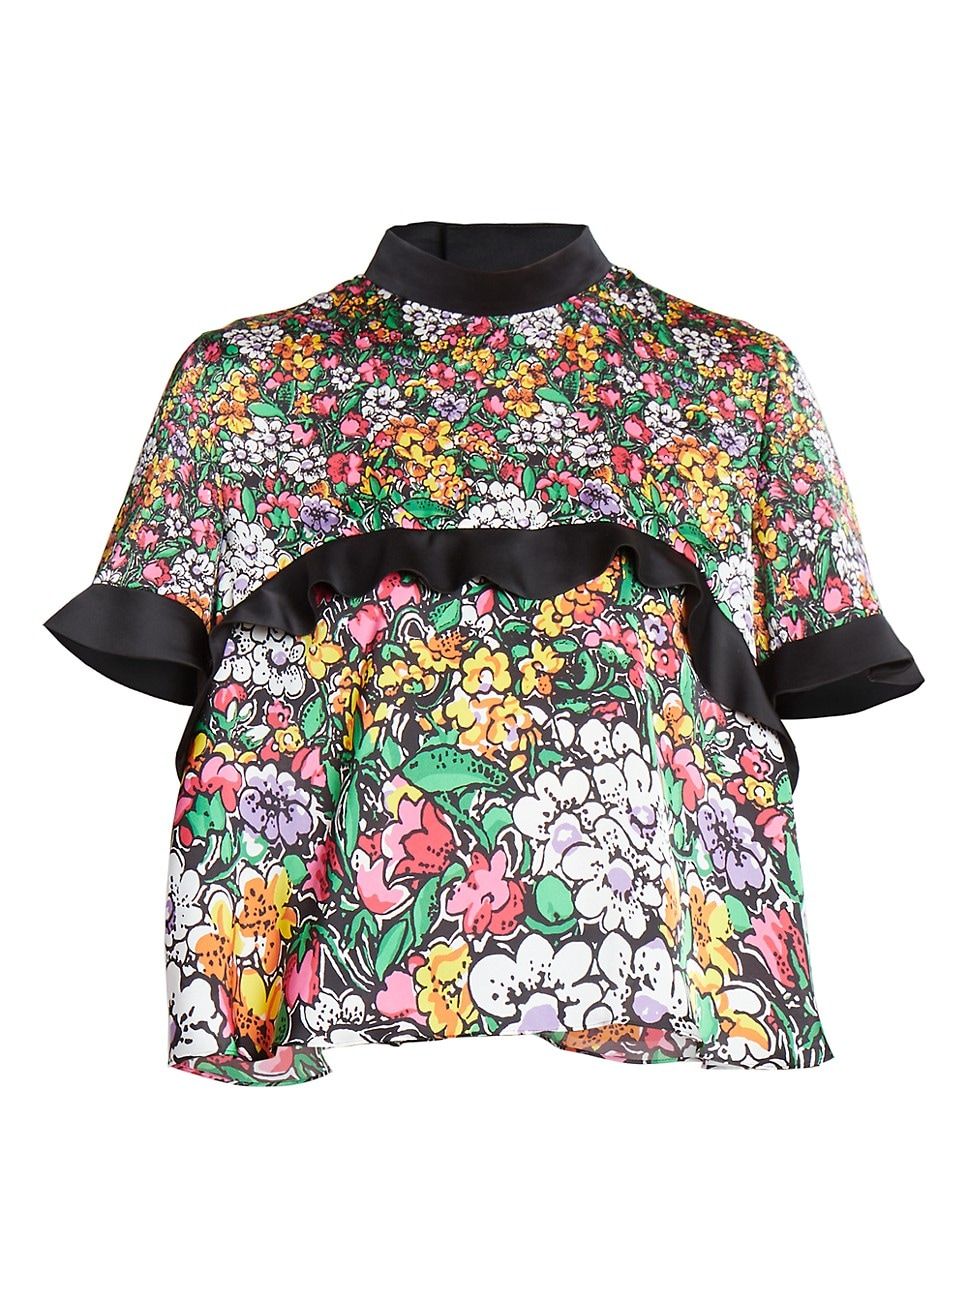 Floral Boxy Top | Saks Fifth Avenue